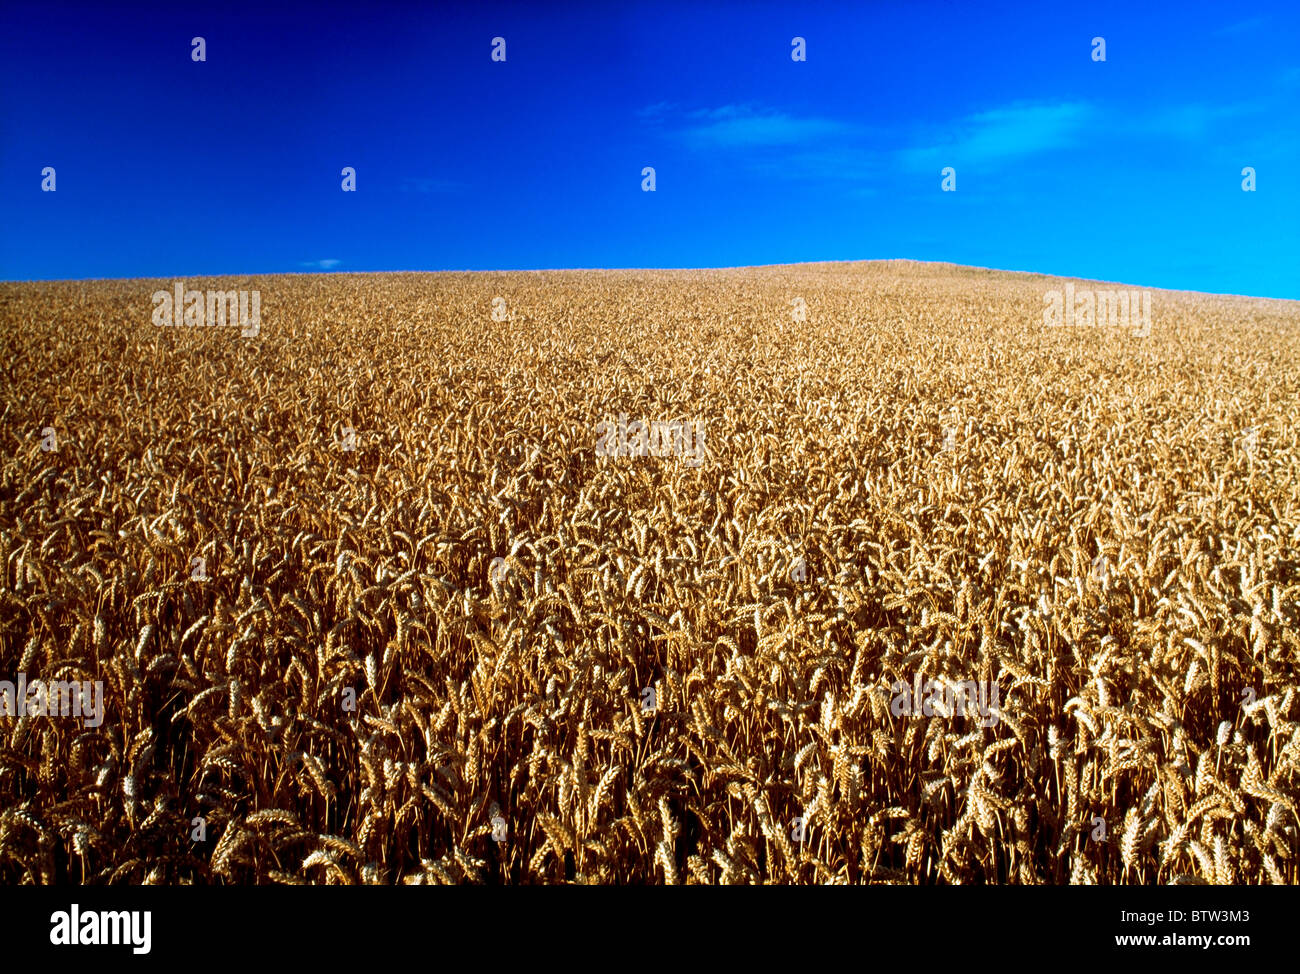 Haggardstown, Dundalk, Co Louth, Ireland, Wheat Stock Photo